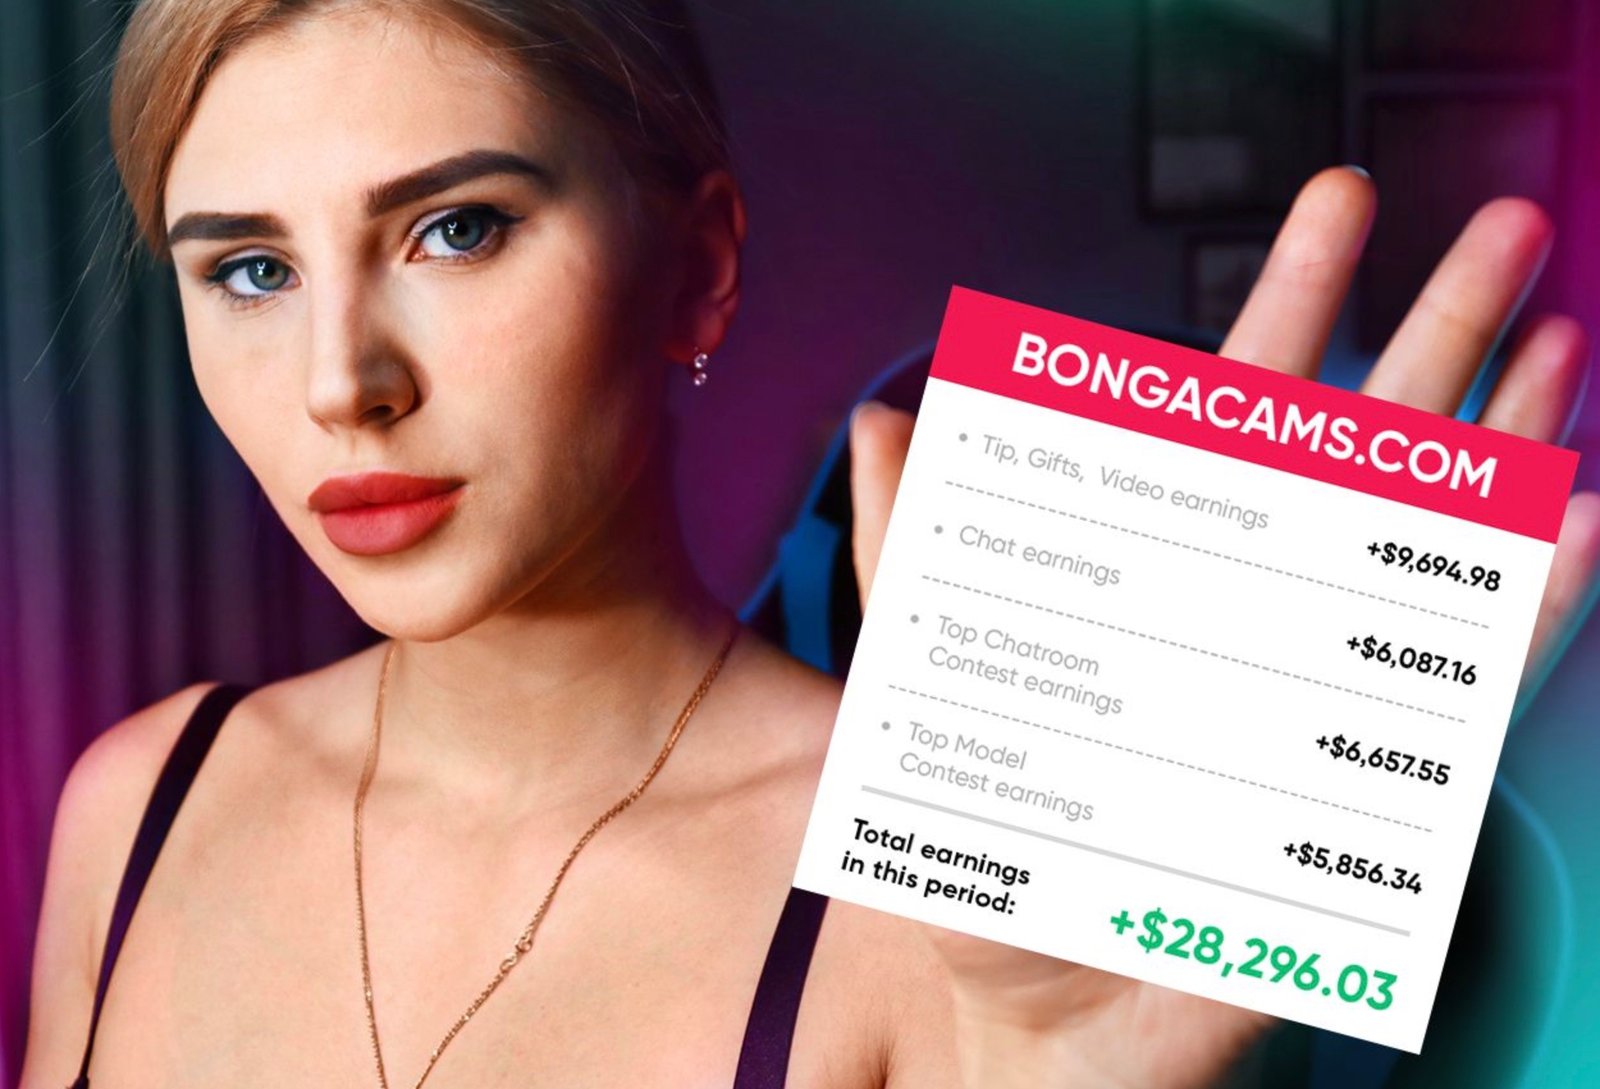 A female journalist conducted an experiment: she registered on webcam site BongaCams and earned $1920!